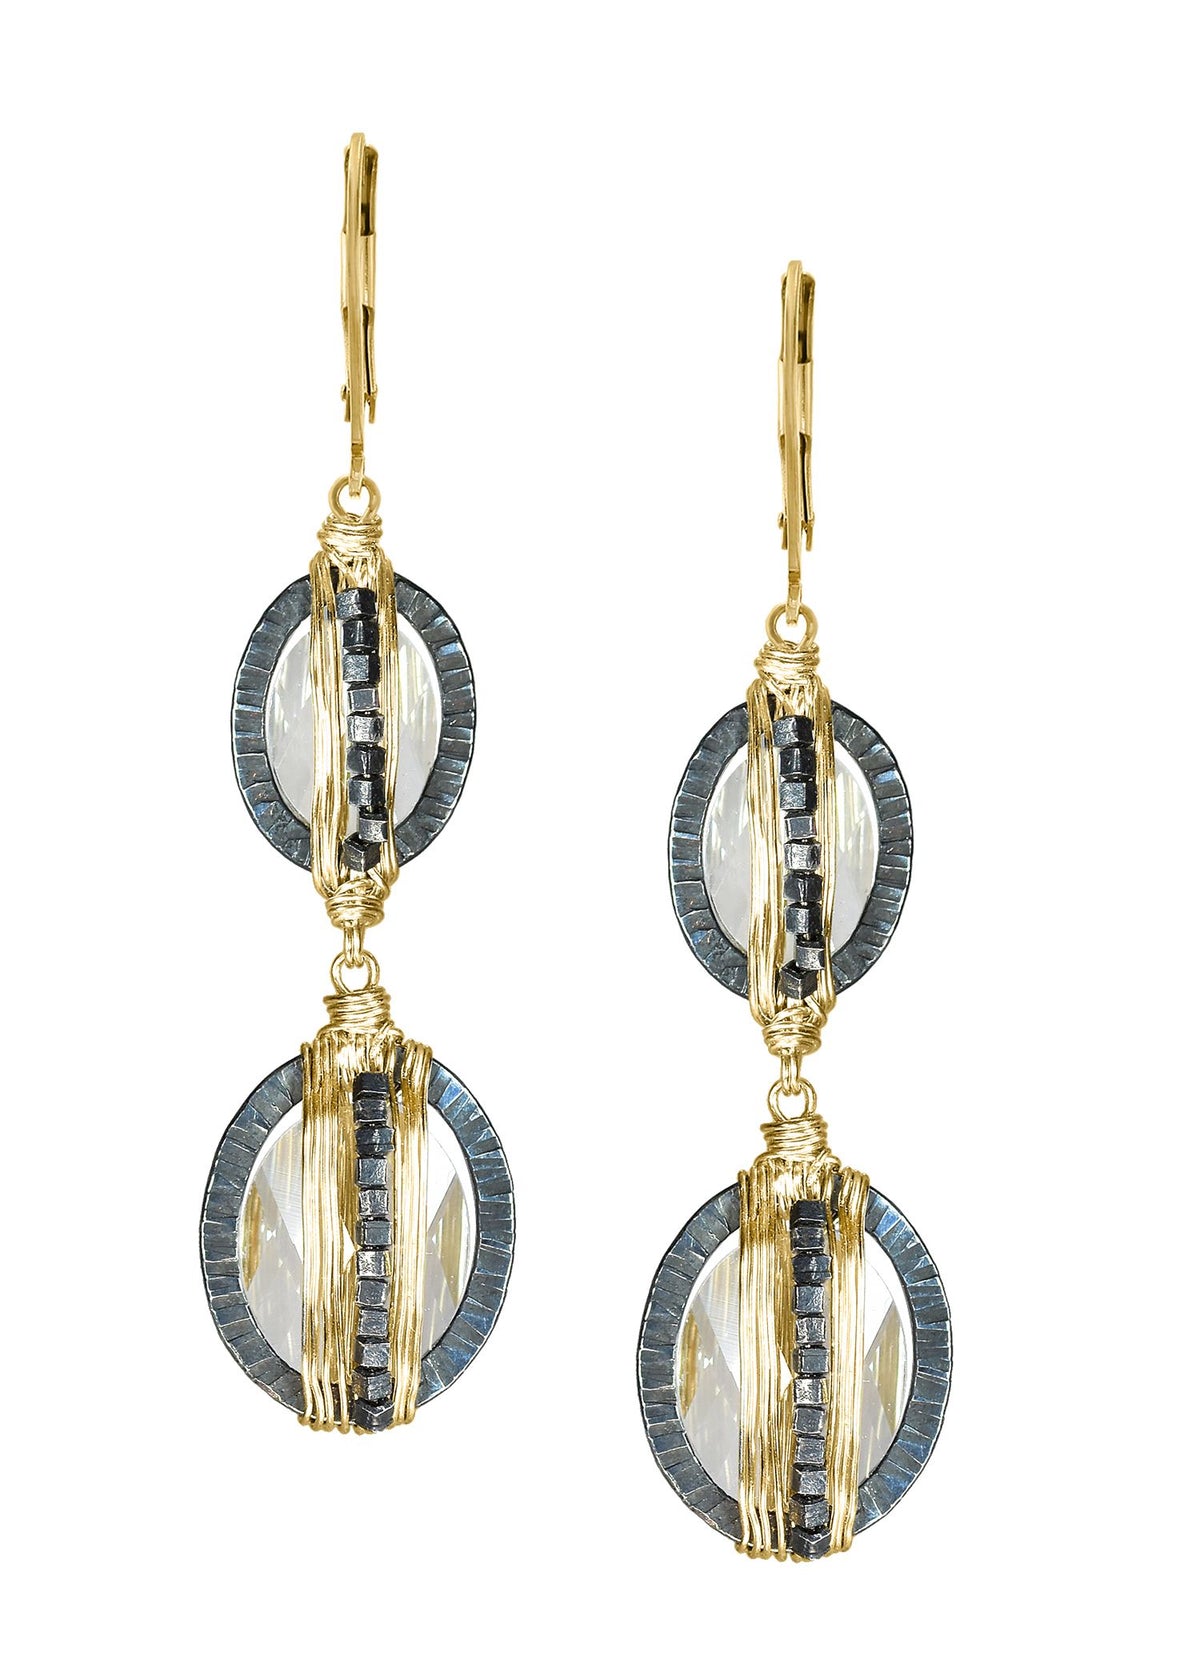 Crystal 14k gold fill Blackened sterling silver Mixed metal Earrings measure 1-7/8&quot; in length (including the levers) and 7/16&quot; in width Handmade in our Los Angeles studio